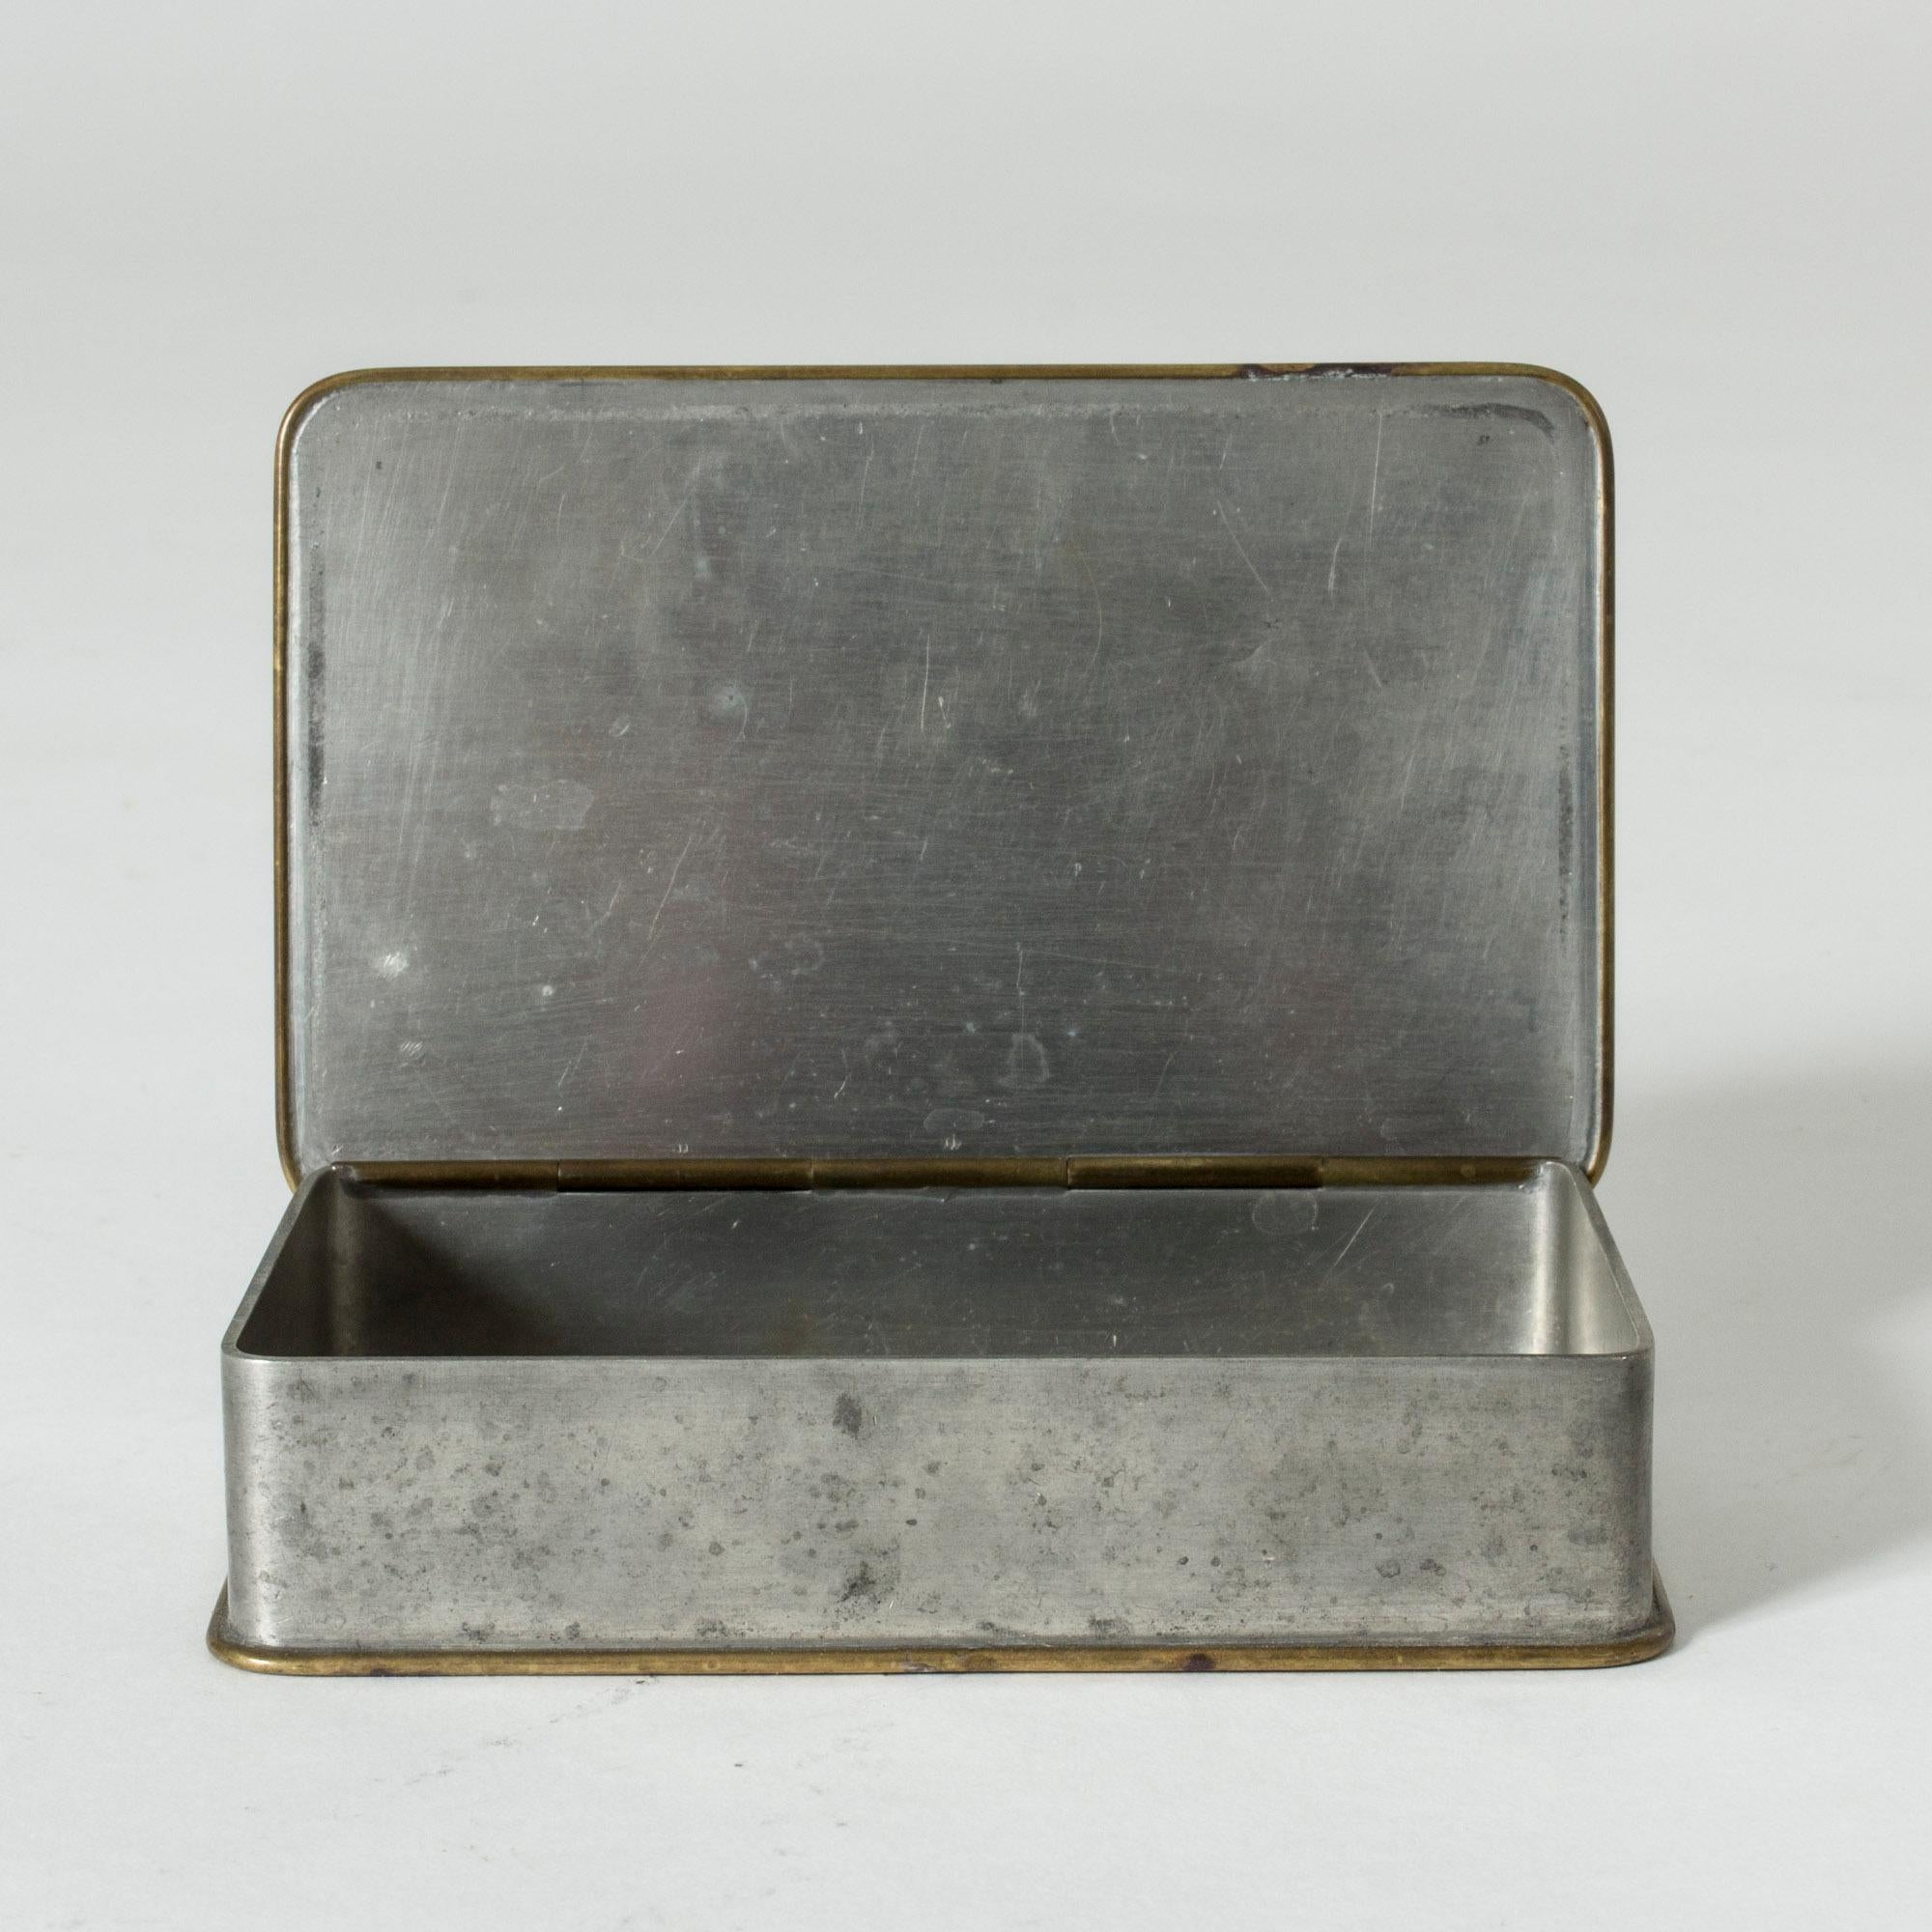 Scandinavian Modern Pewter Box by Nils Fougstedt